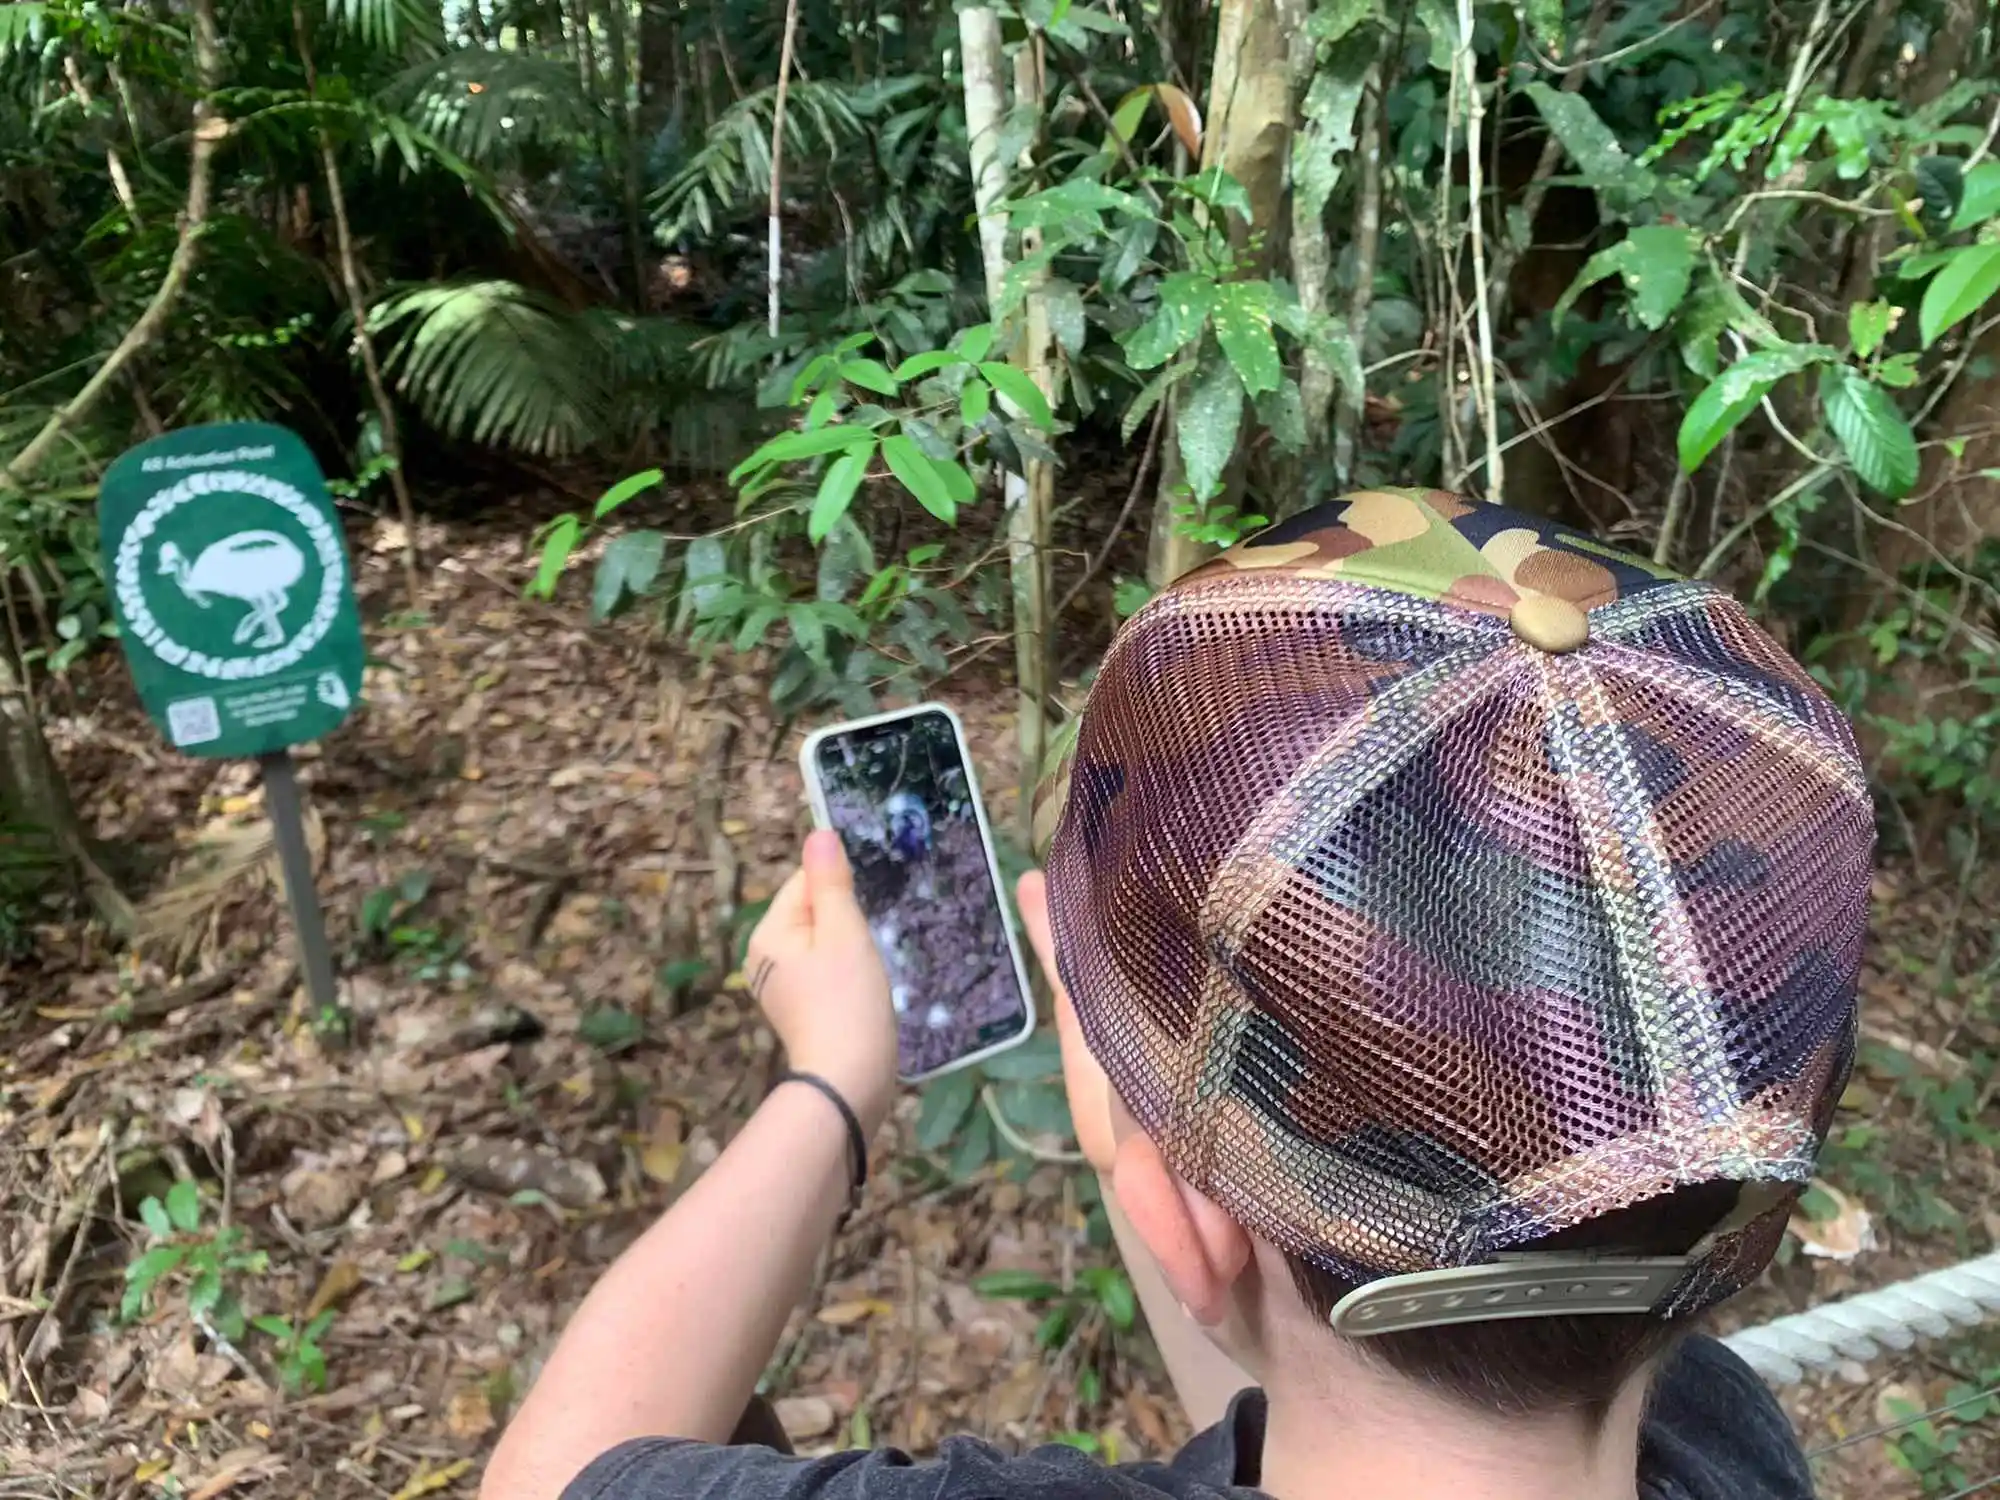 Looking at an Augmented Reality point from behind a boy wearing a cap.